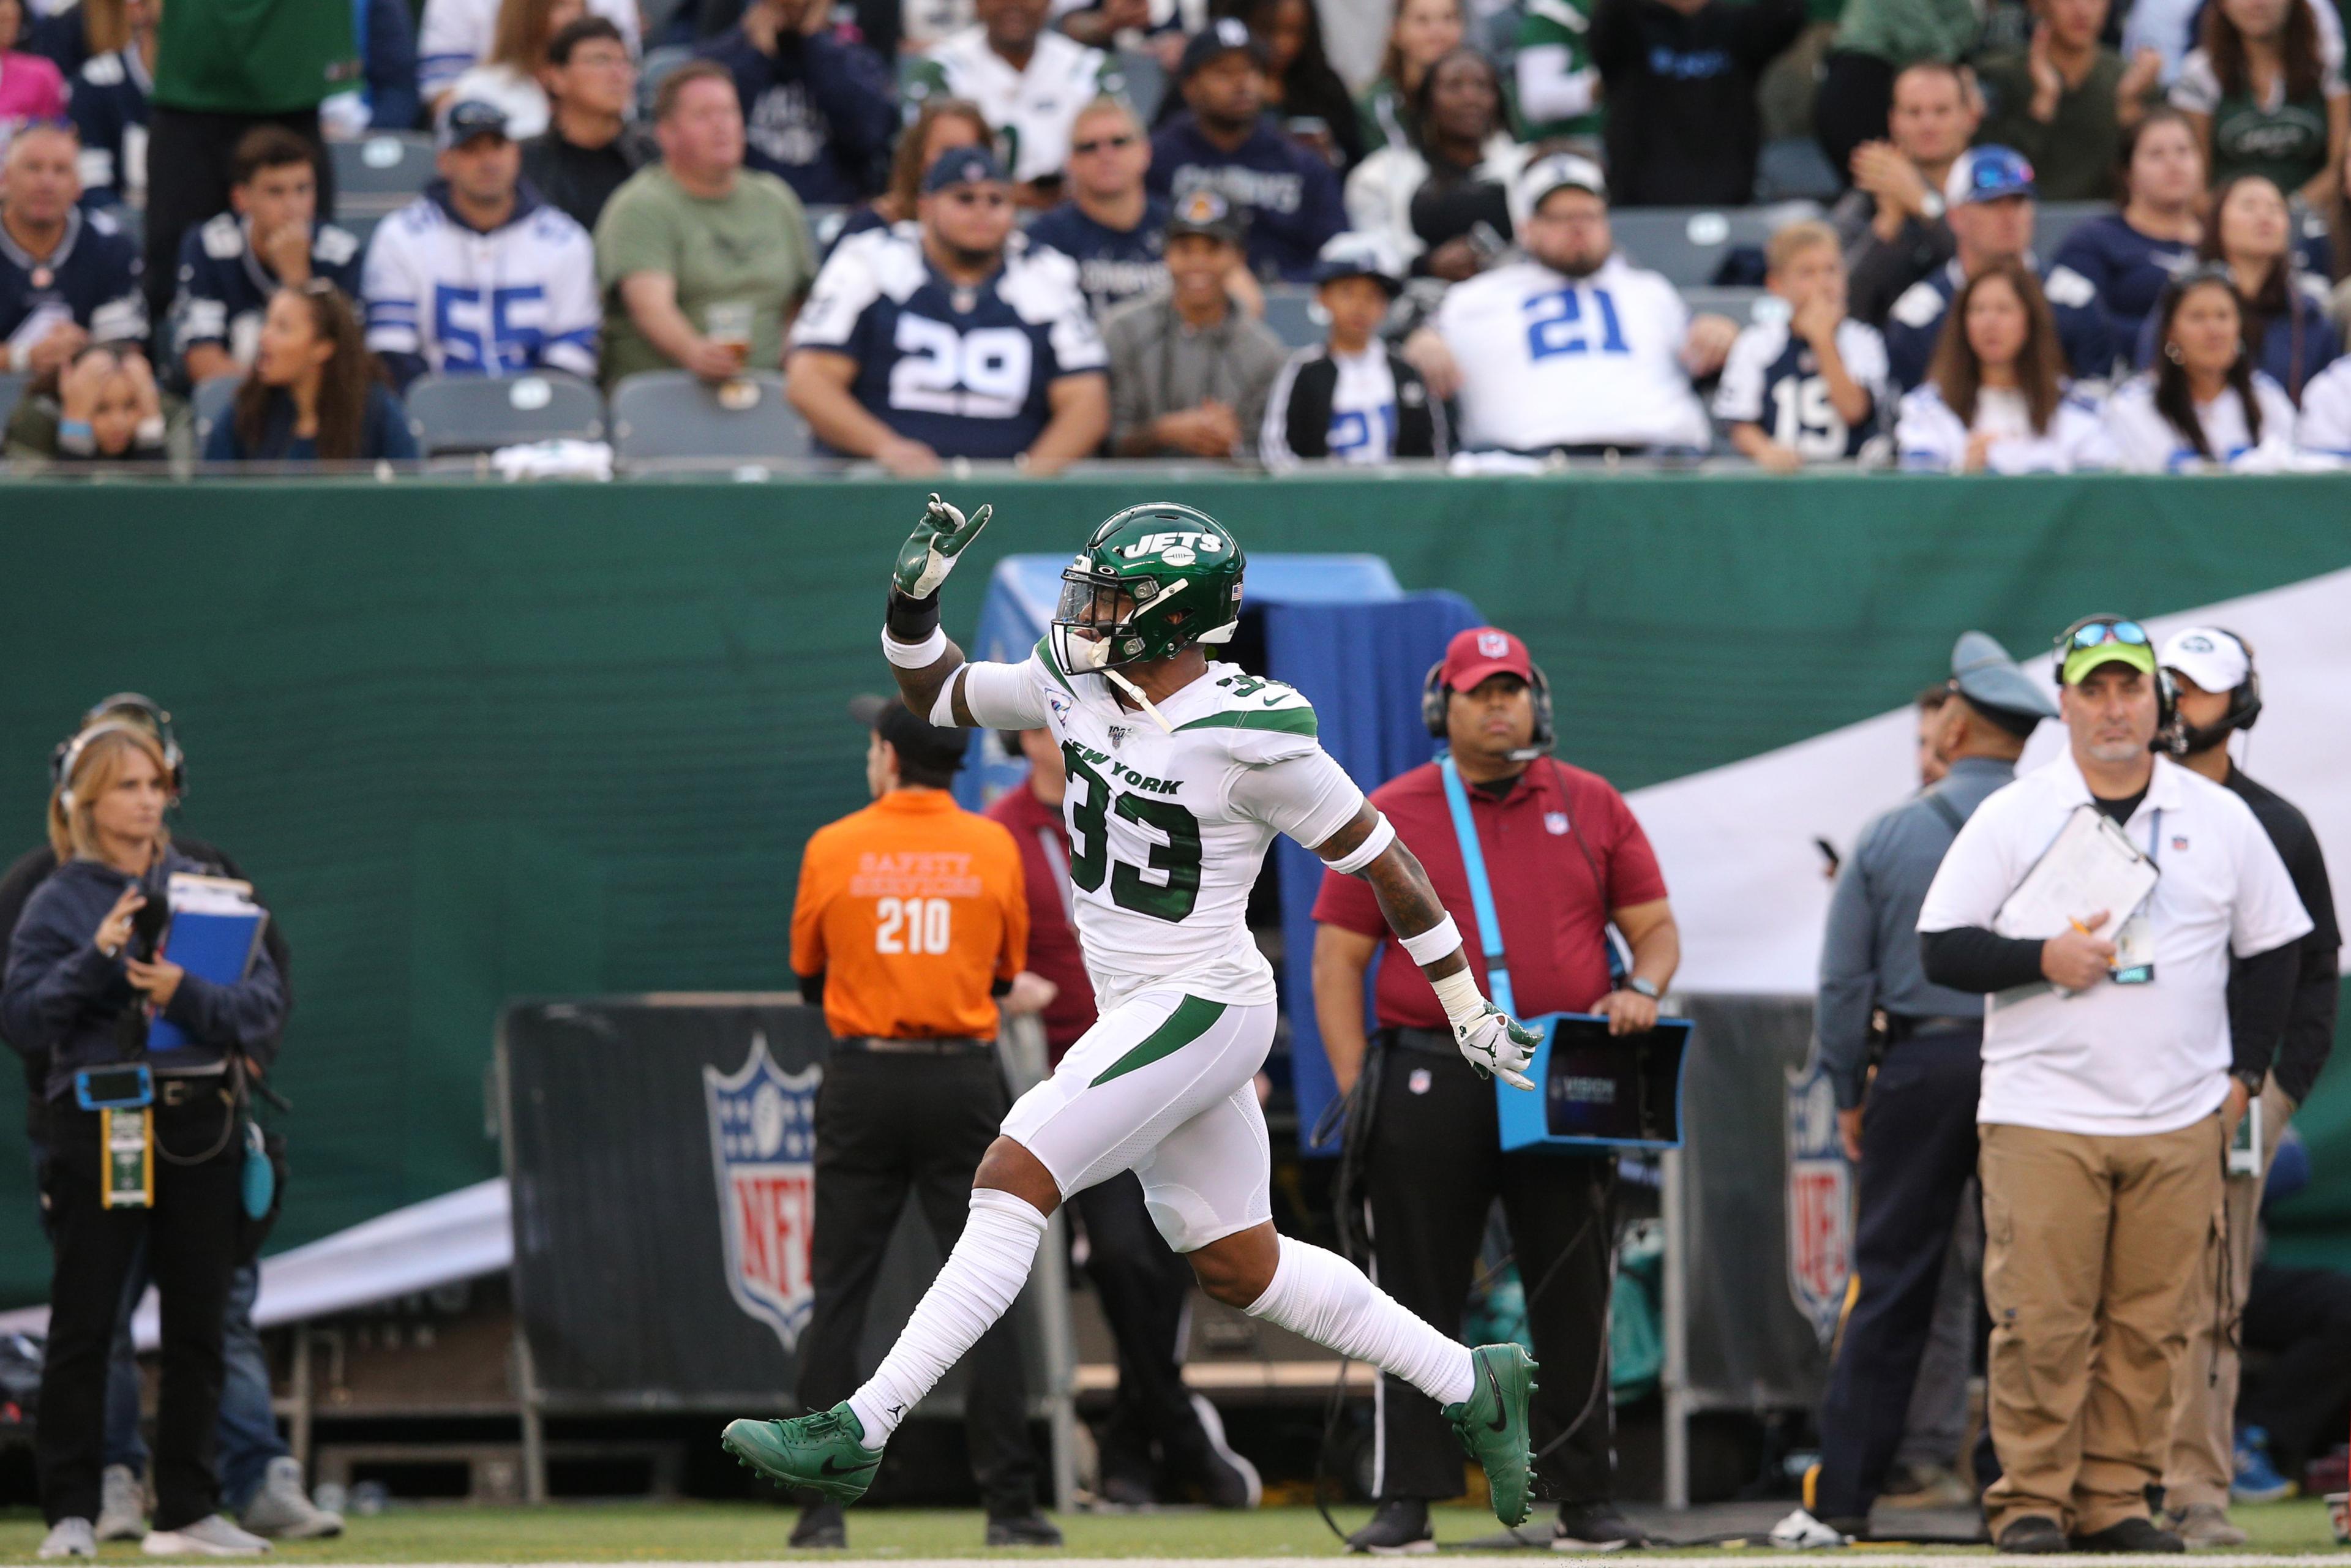 Oct 13, 2019; East Rutherford, NJ, USA; New York Jets safety Jamal Adams (33) reacts during the second quarter against the Dallas Cowboys at MetLife Stadium. Mandatory Credit: Brad Penner-USA TODAY Sports / Brad Penner-USA TODAY Sports